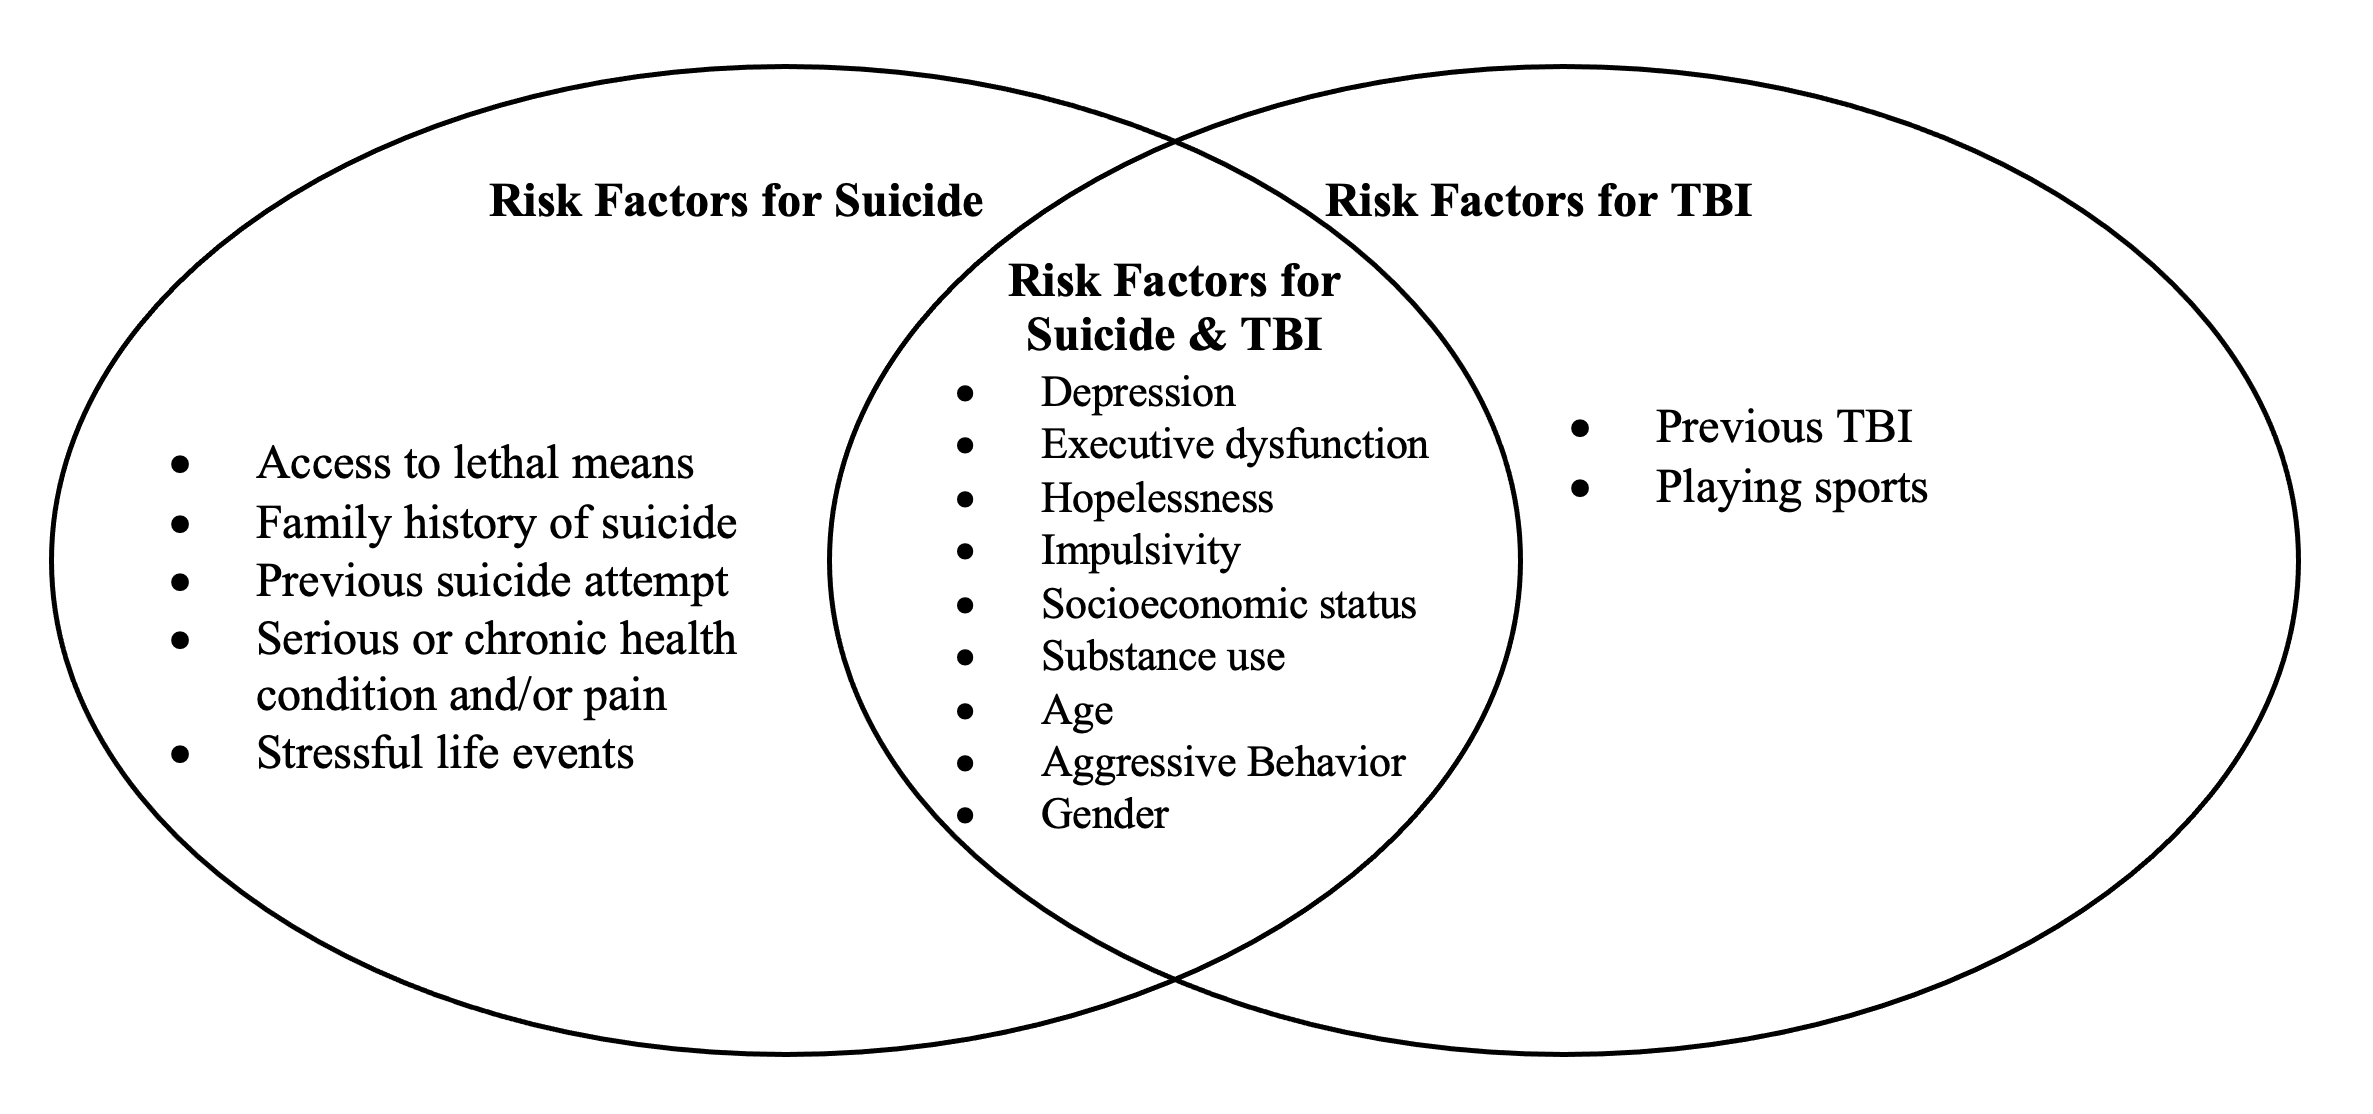 Venn diagram comparing risk factors for suicide and risk factors for TBI, and the overlapping area with common risk factors between the two (transcript below contains full text)